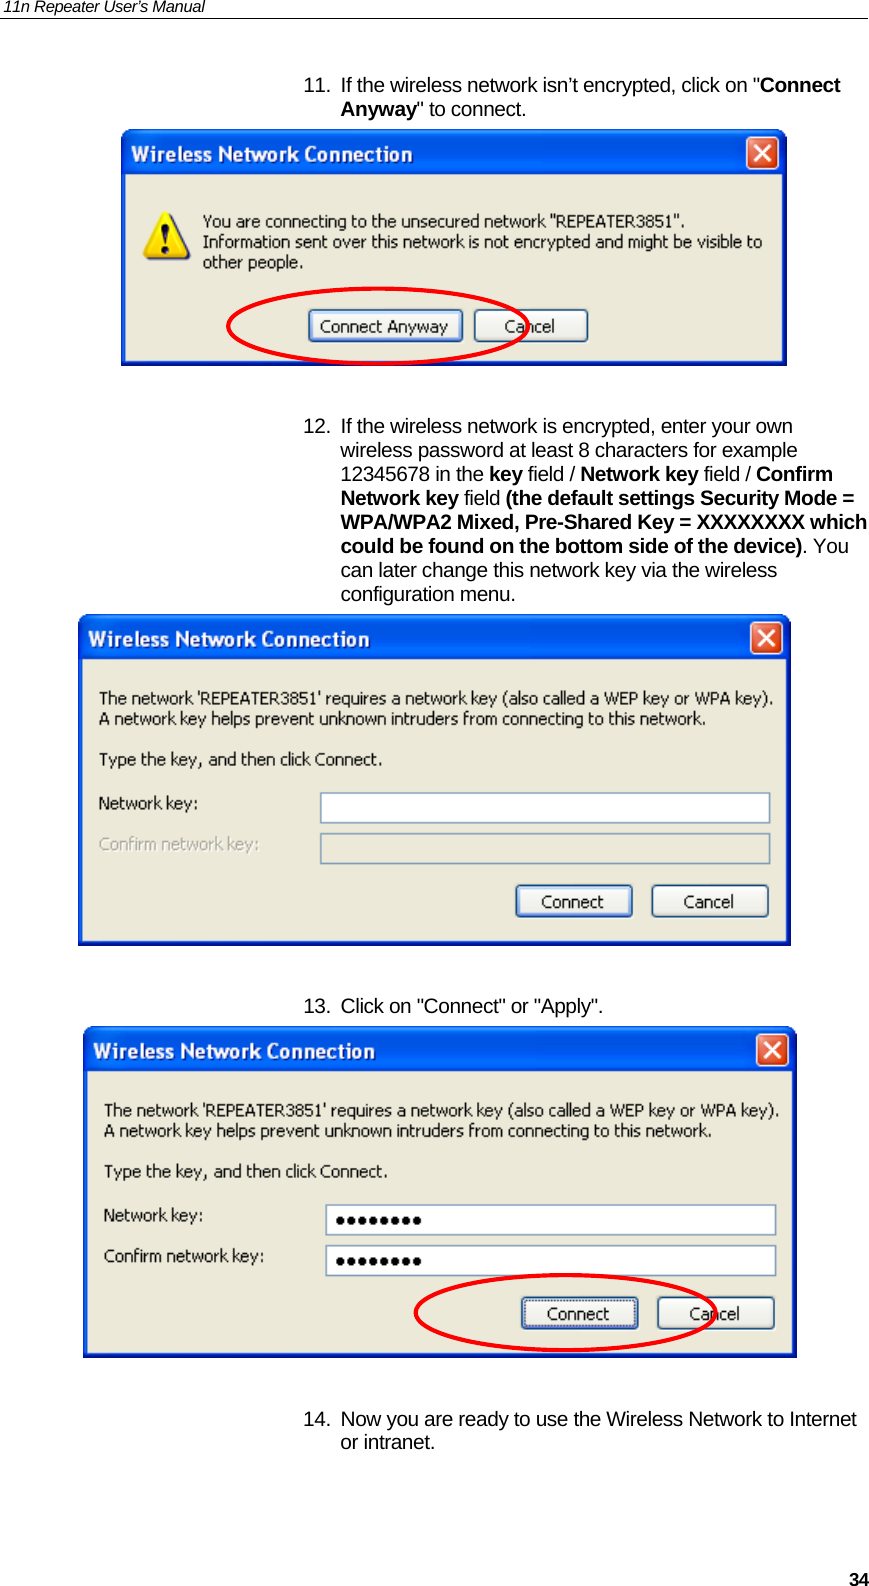 11n Repeater User’s Manual     3411.  If the wireless network isn’t encrypted, click on &quot;Connect Anyway&quot; to connect.    12.  If the wireless network is encrypted, enter your own wireless password at least 8 characters for example 12345678 in the key field / Network key field / Confirm Network key field (the default settings Security Mode = WPA/WPA2 Mixed, Pre-Shared Key = XXXXXXXX which could be found on the bottom side of the device). You can later change this network key via the wireless configuration menu.   13.  Click on &quot;Connect&quot; or &quot;Apply&quot;.    14.  Now you are ready to use the Wireless Network to Internet or intranet.   